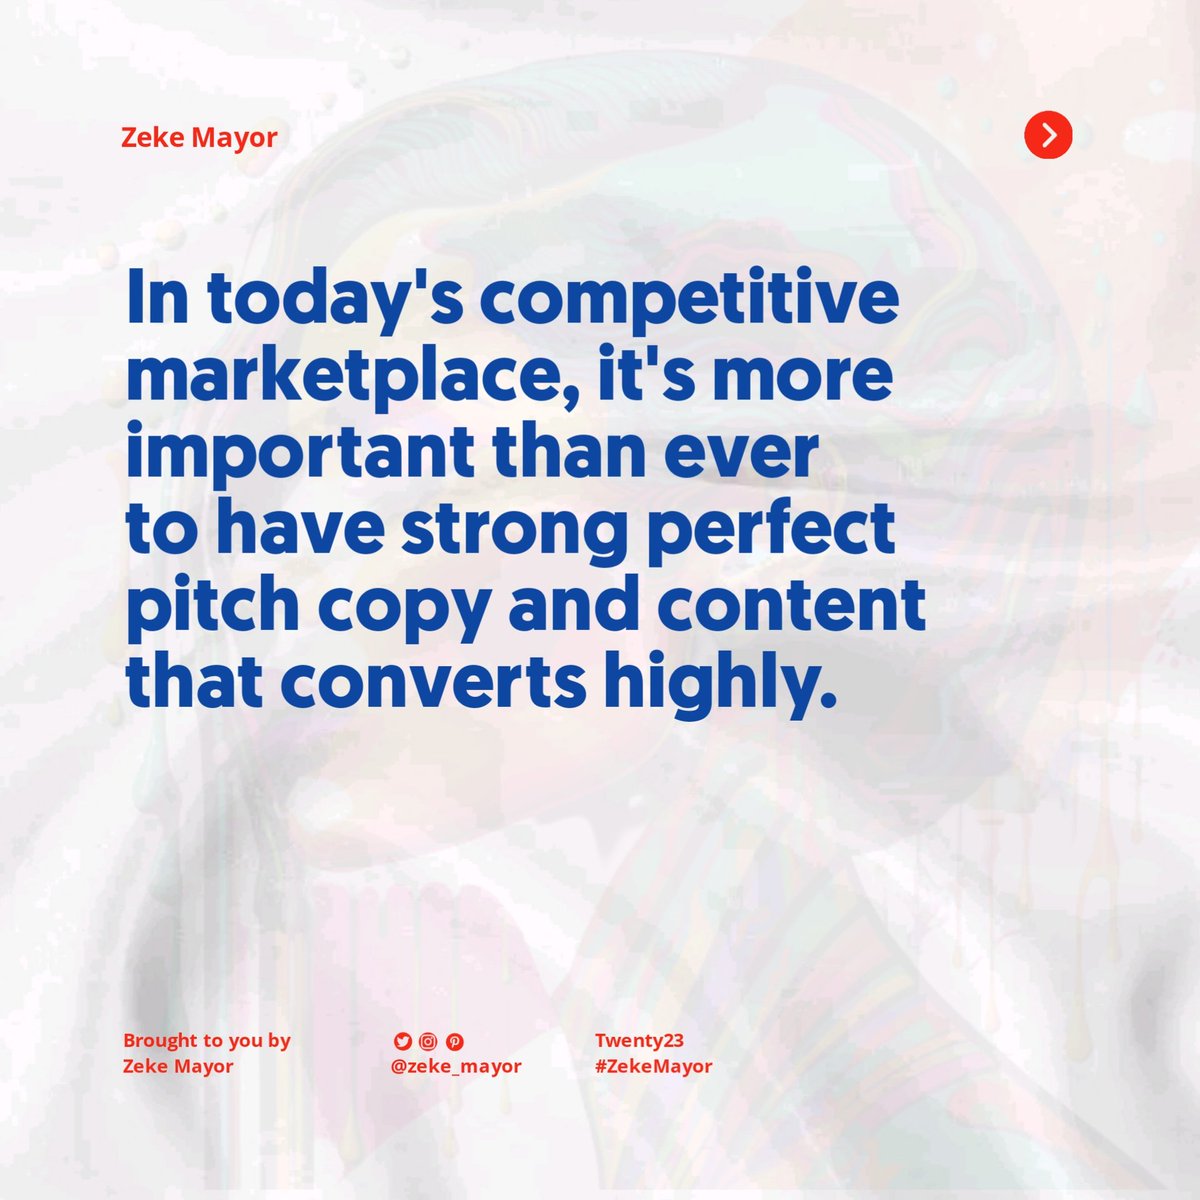 In today's competitive marketplace, it's more important than ever to have strong perfect pitch copy and content that converts highly. #CopywritingMatter #ContentIsKing
#CompetitiveMarketing #MarketingEdge #CreateAnImpact #StandOutFromTheCrowd #ContentMatter #ContentMarketingIsKey